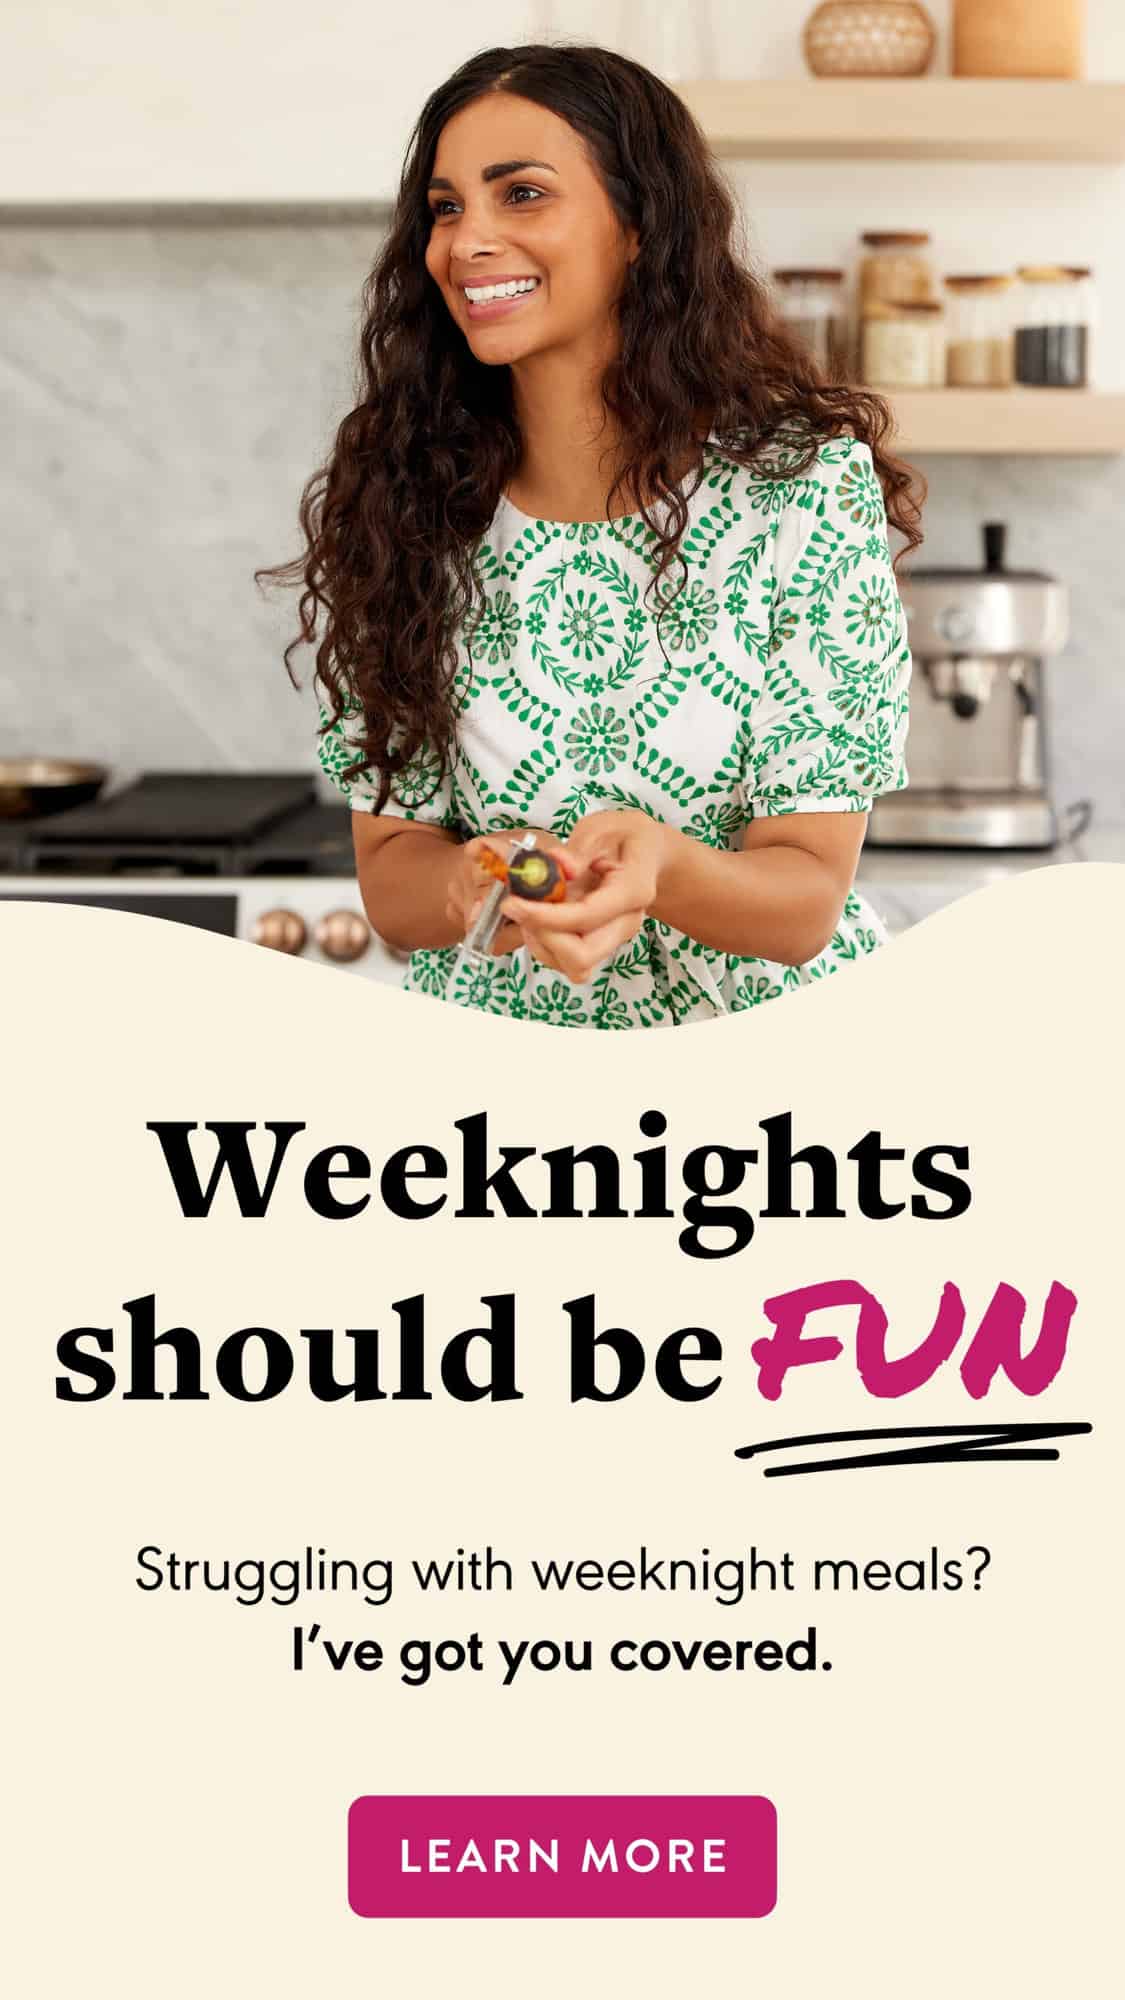 ad for meal plans program with picture of woman with button